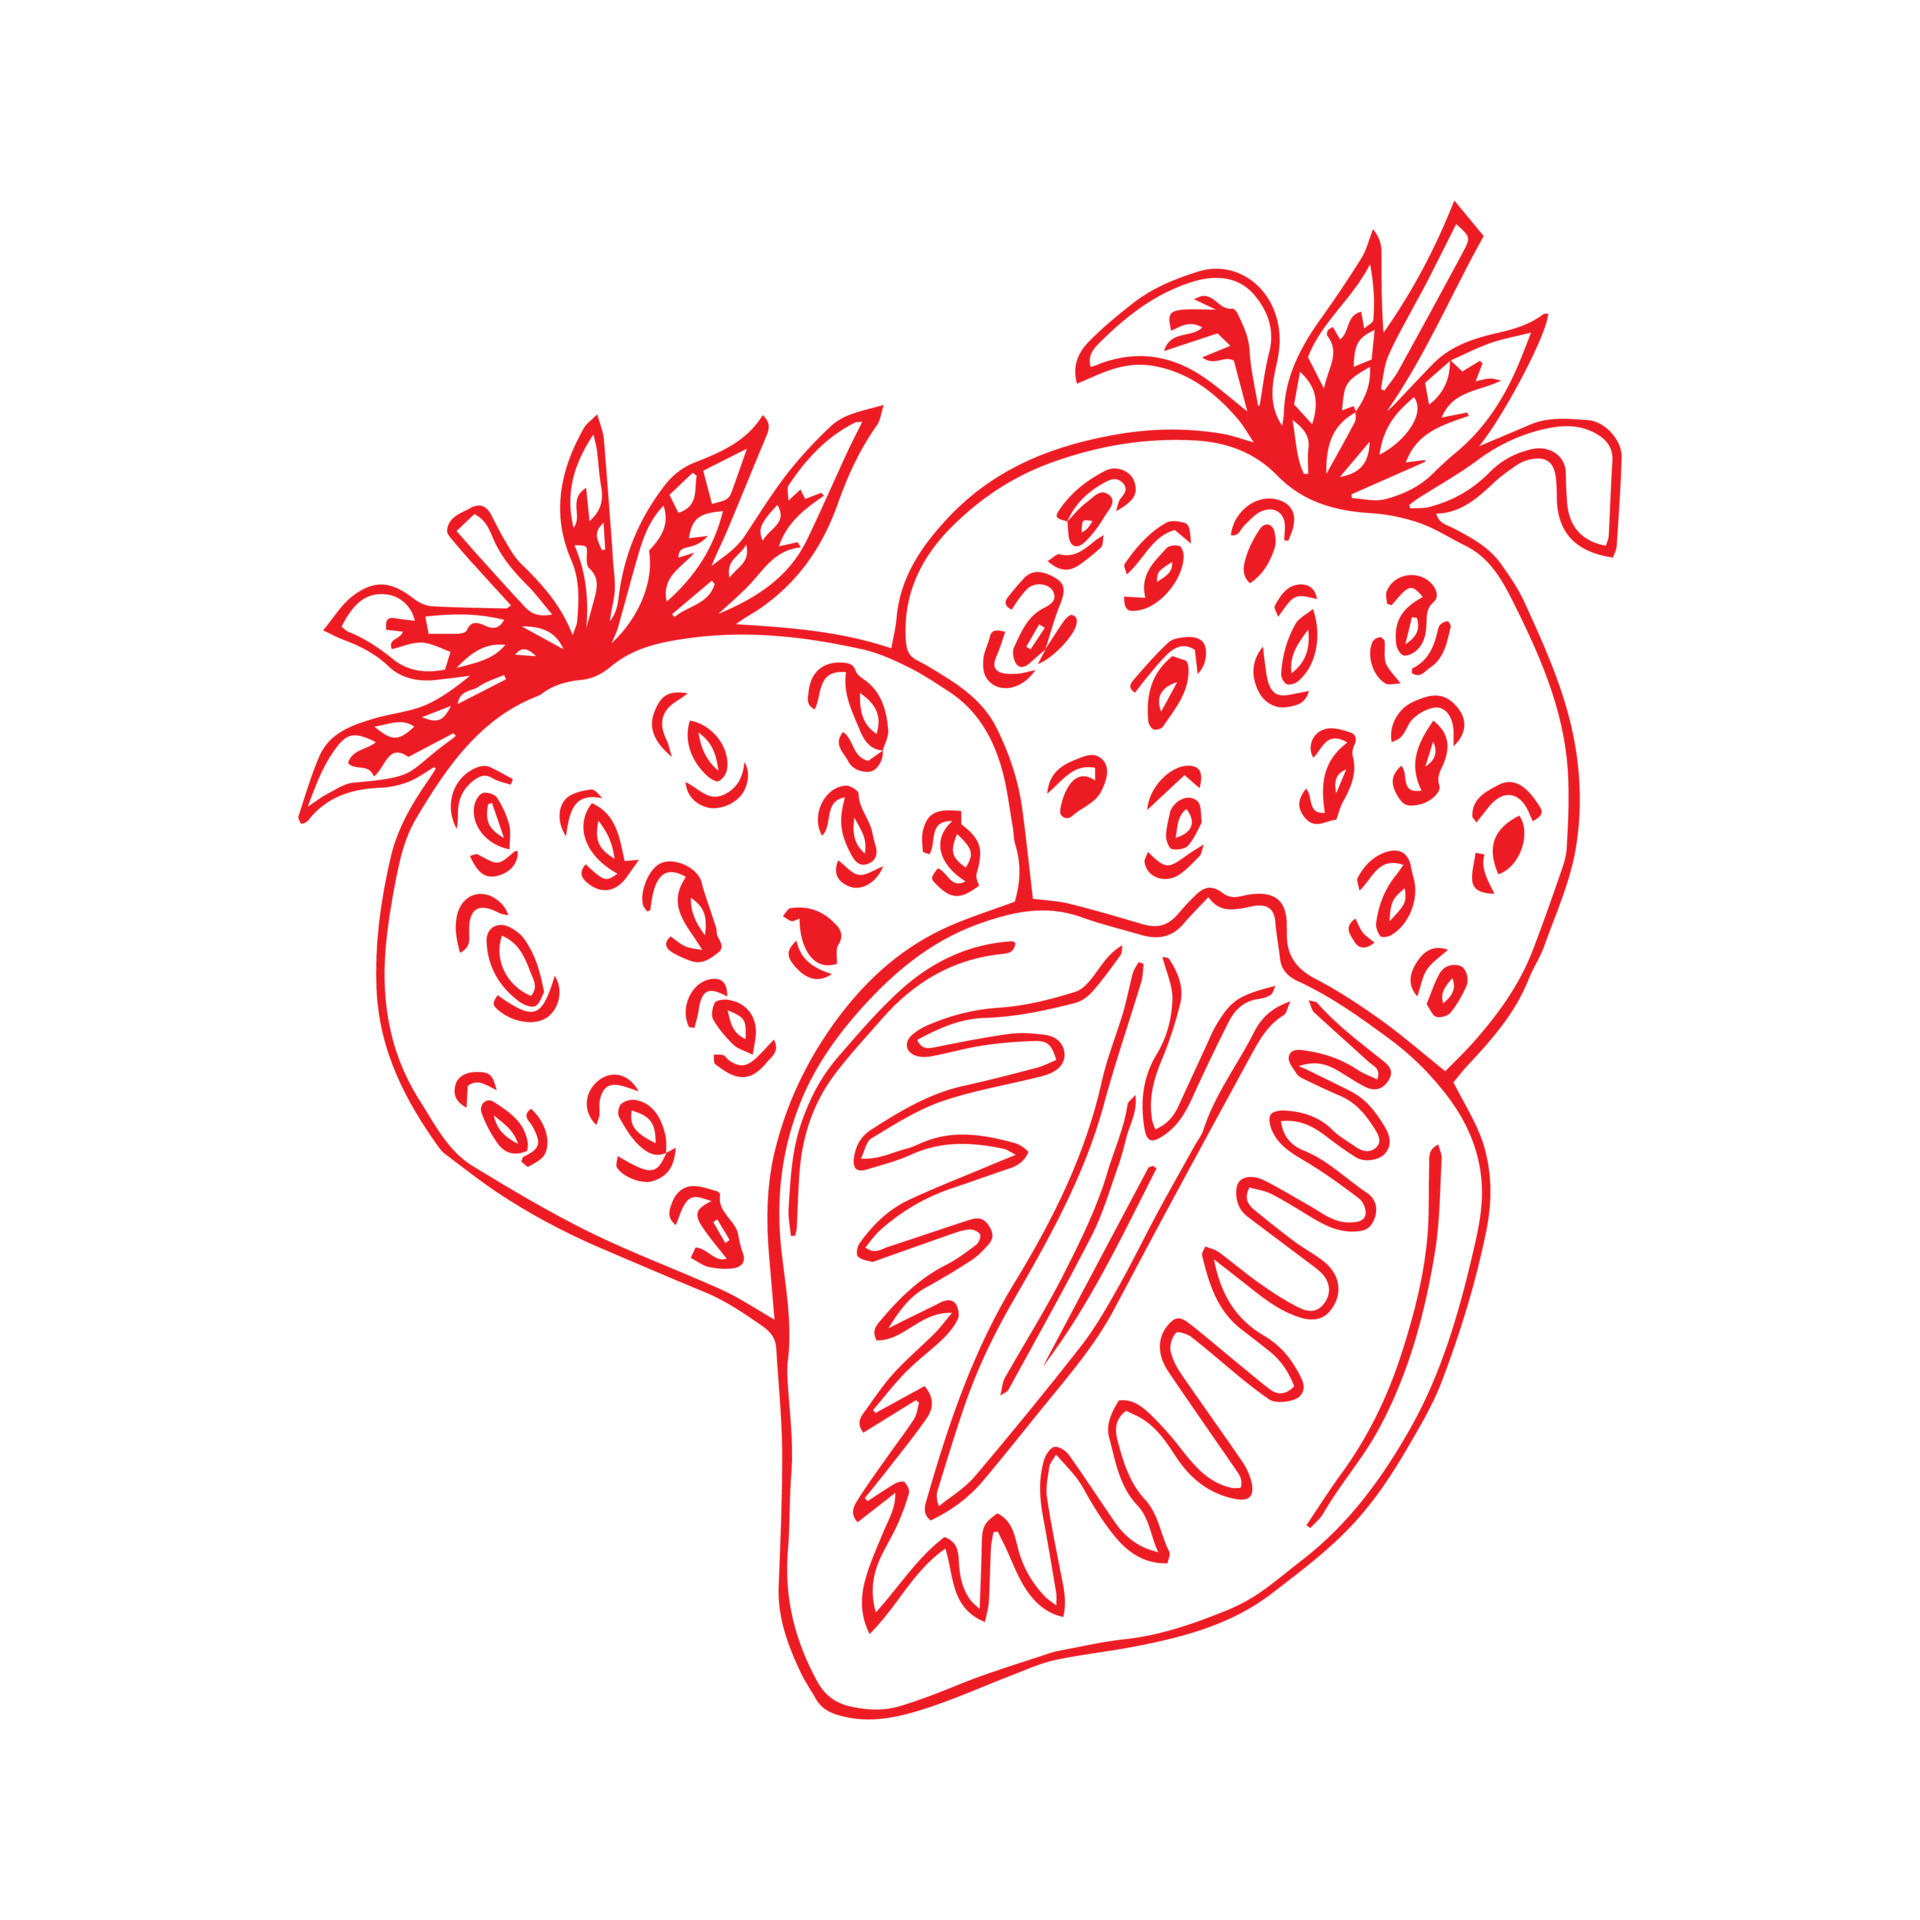 Strawberry freehand drawings, delicious ripe berries, vector image ...